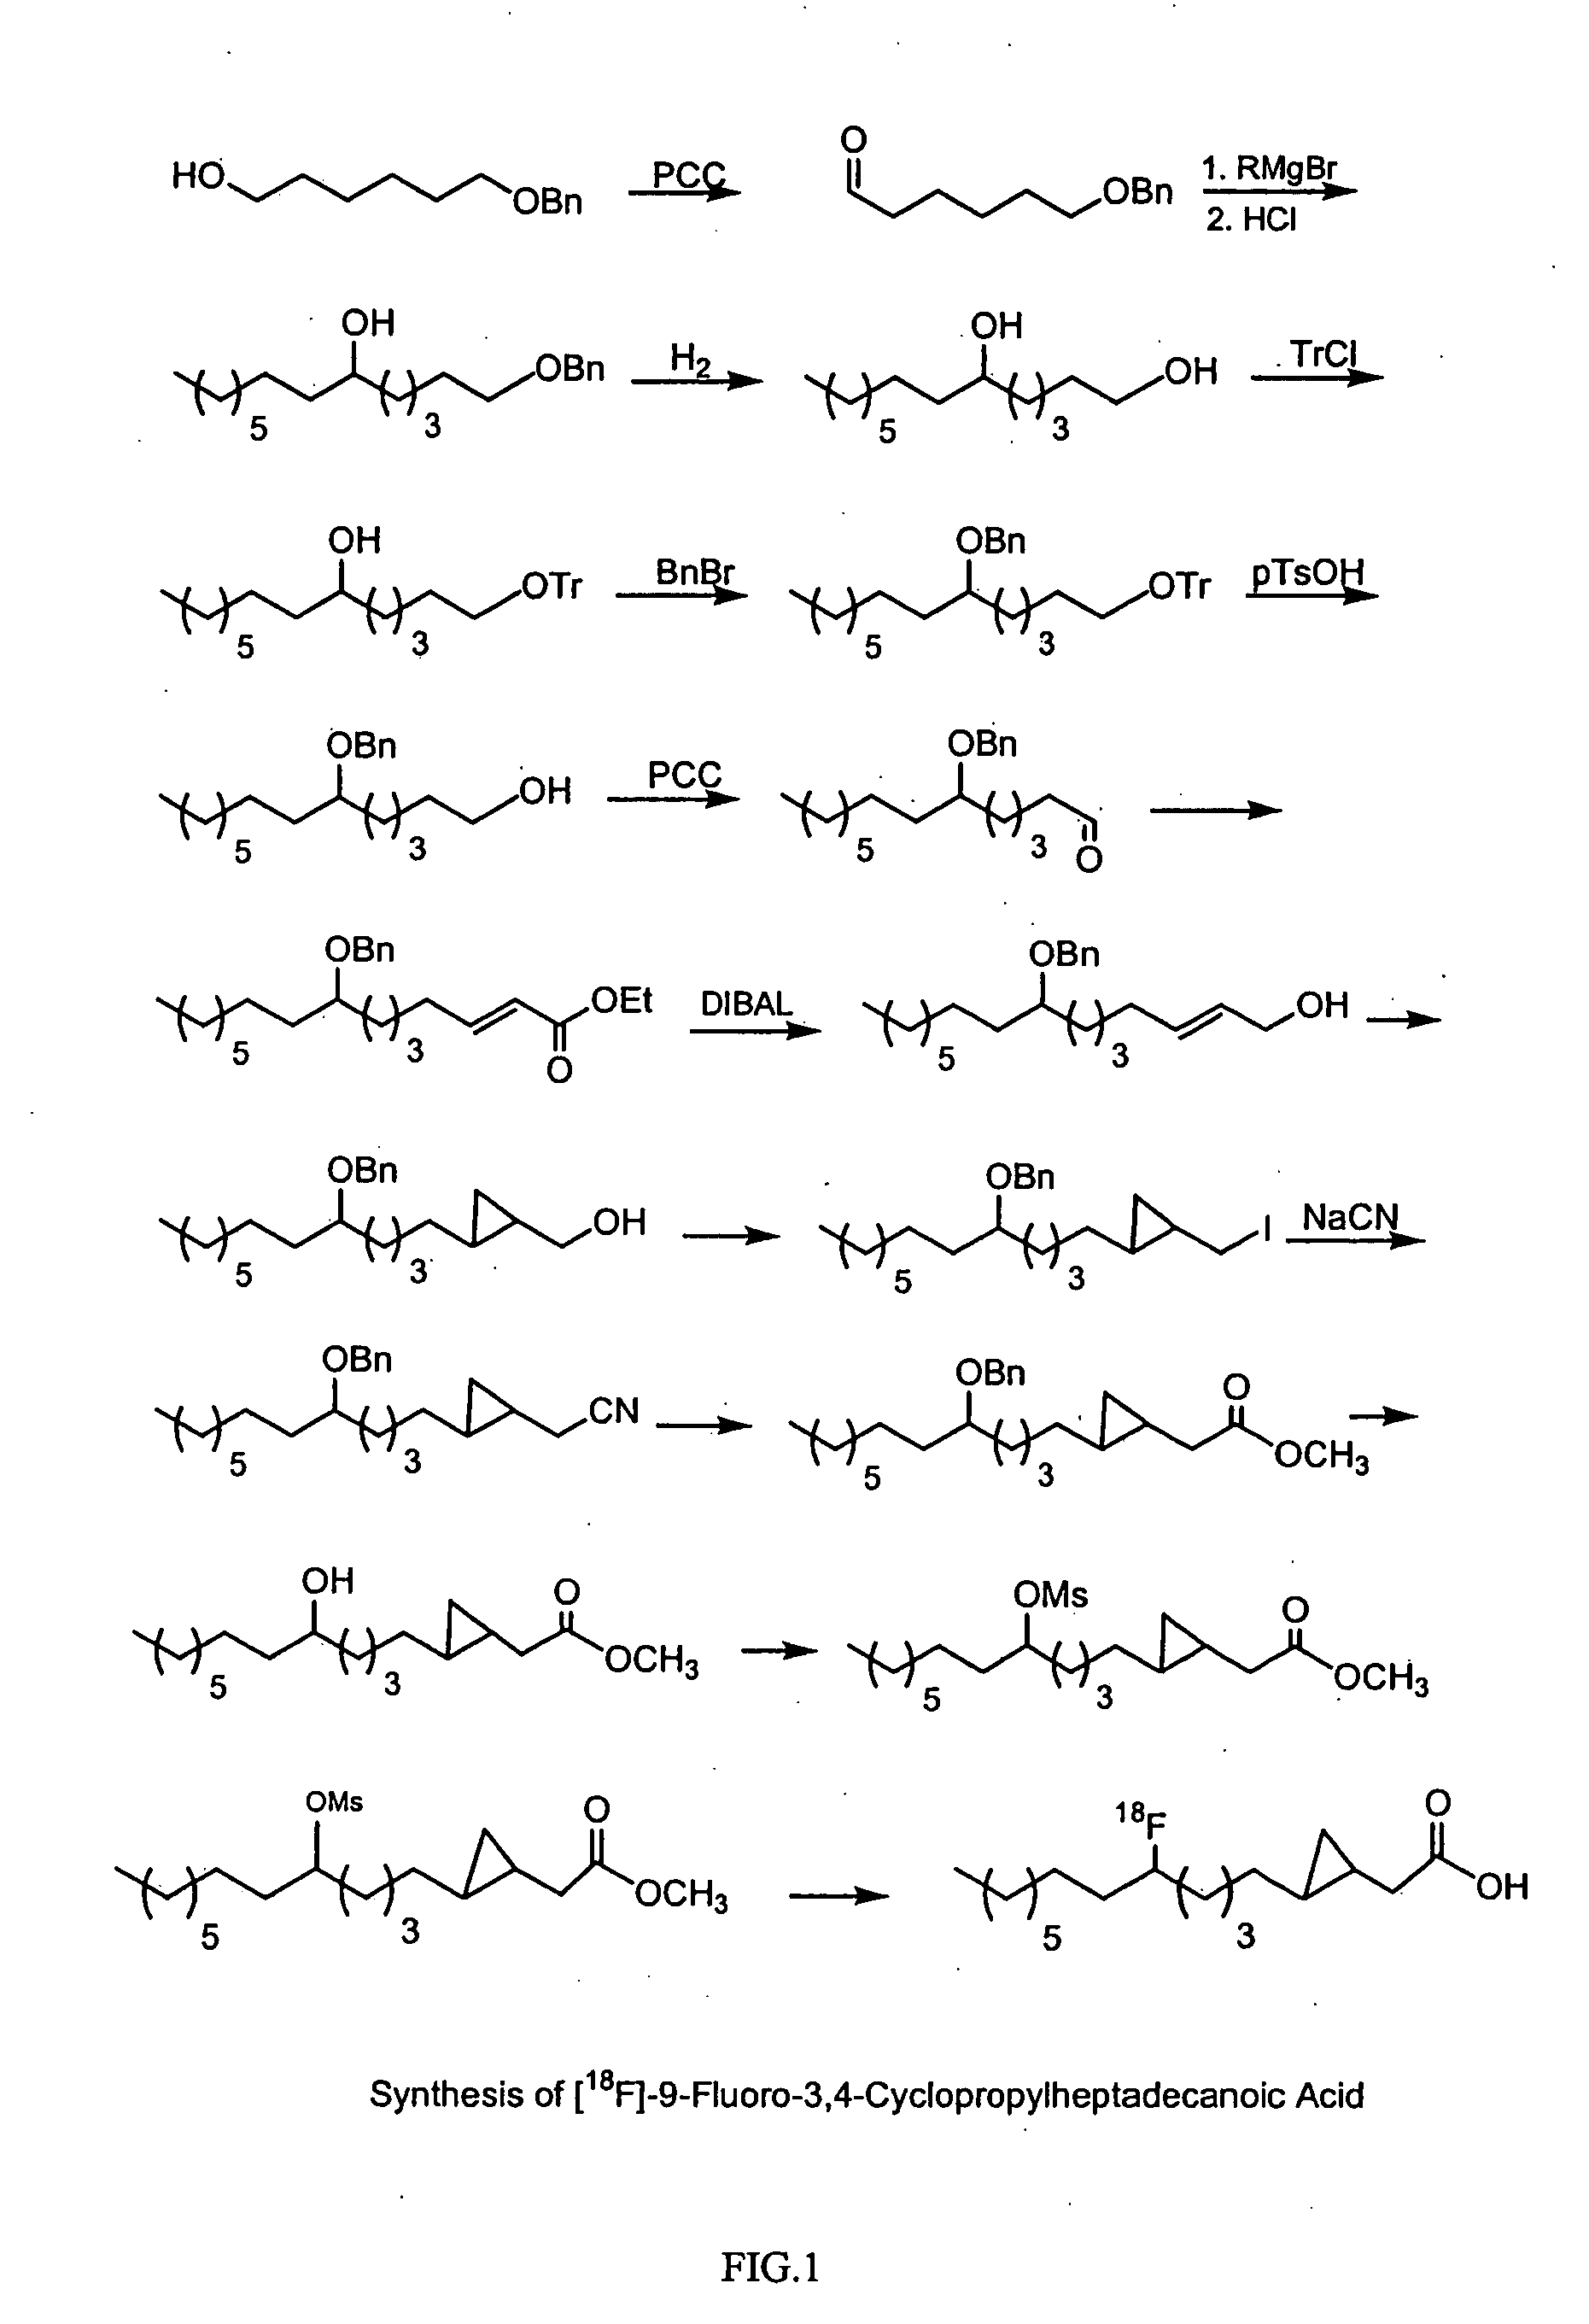 Method for monitoring blood flow and metabolic uptake in tissue with radiolabeled alkanoic acid